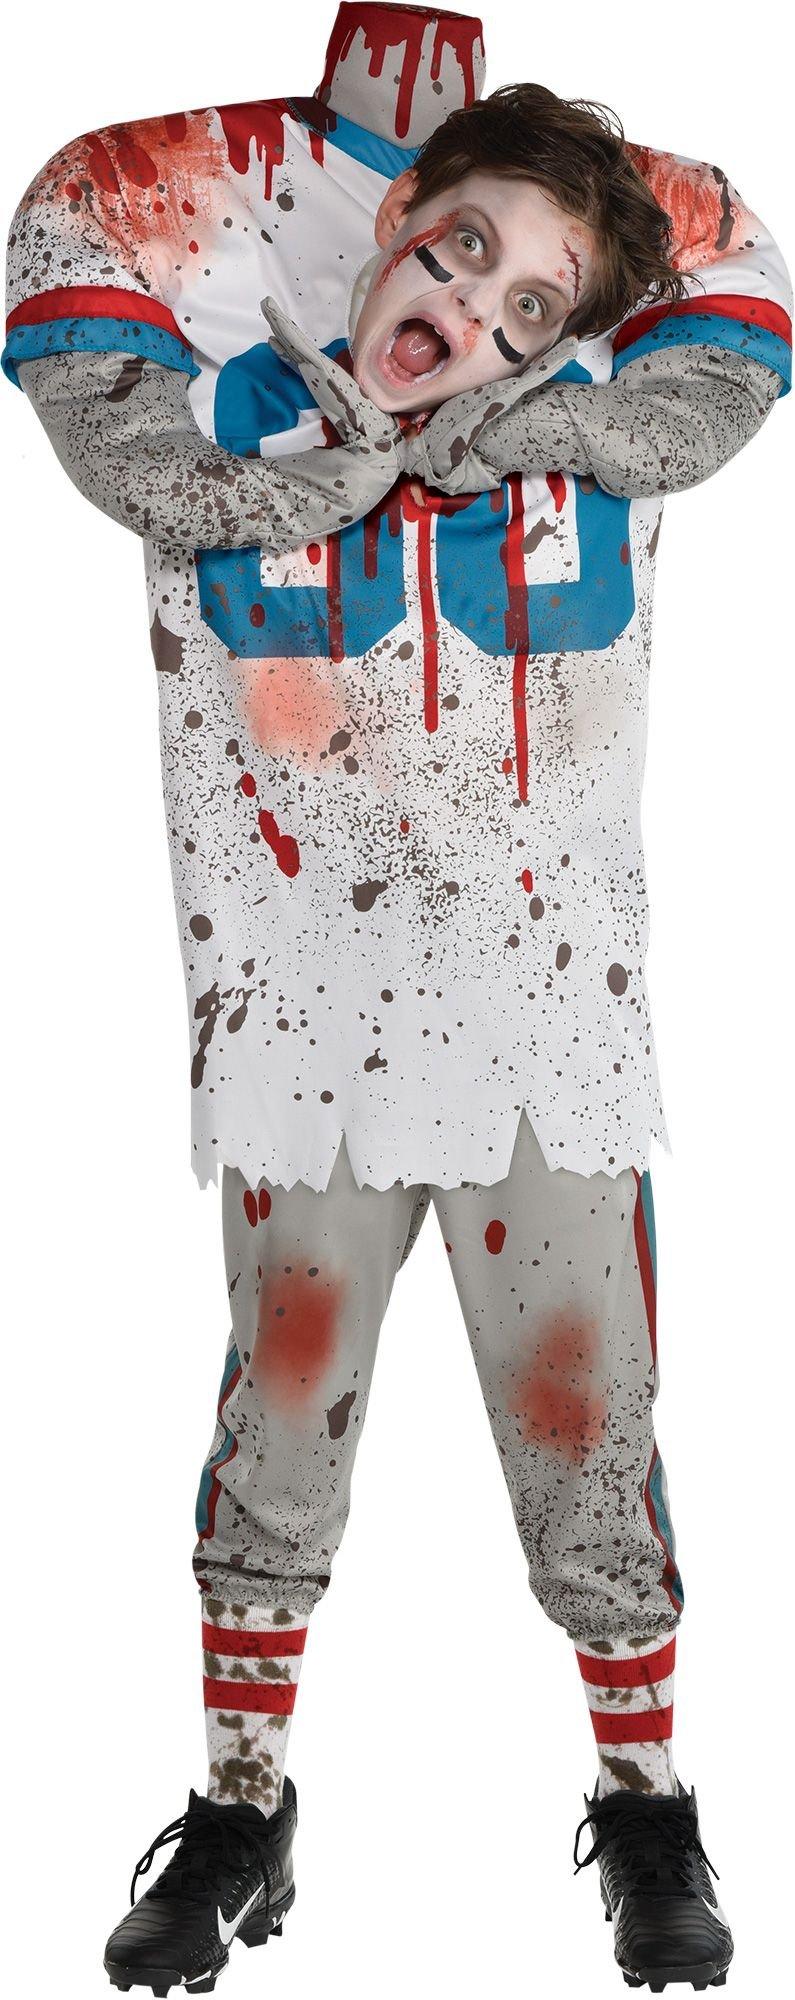 Headless Football Player Illusion Costume | Party City